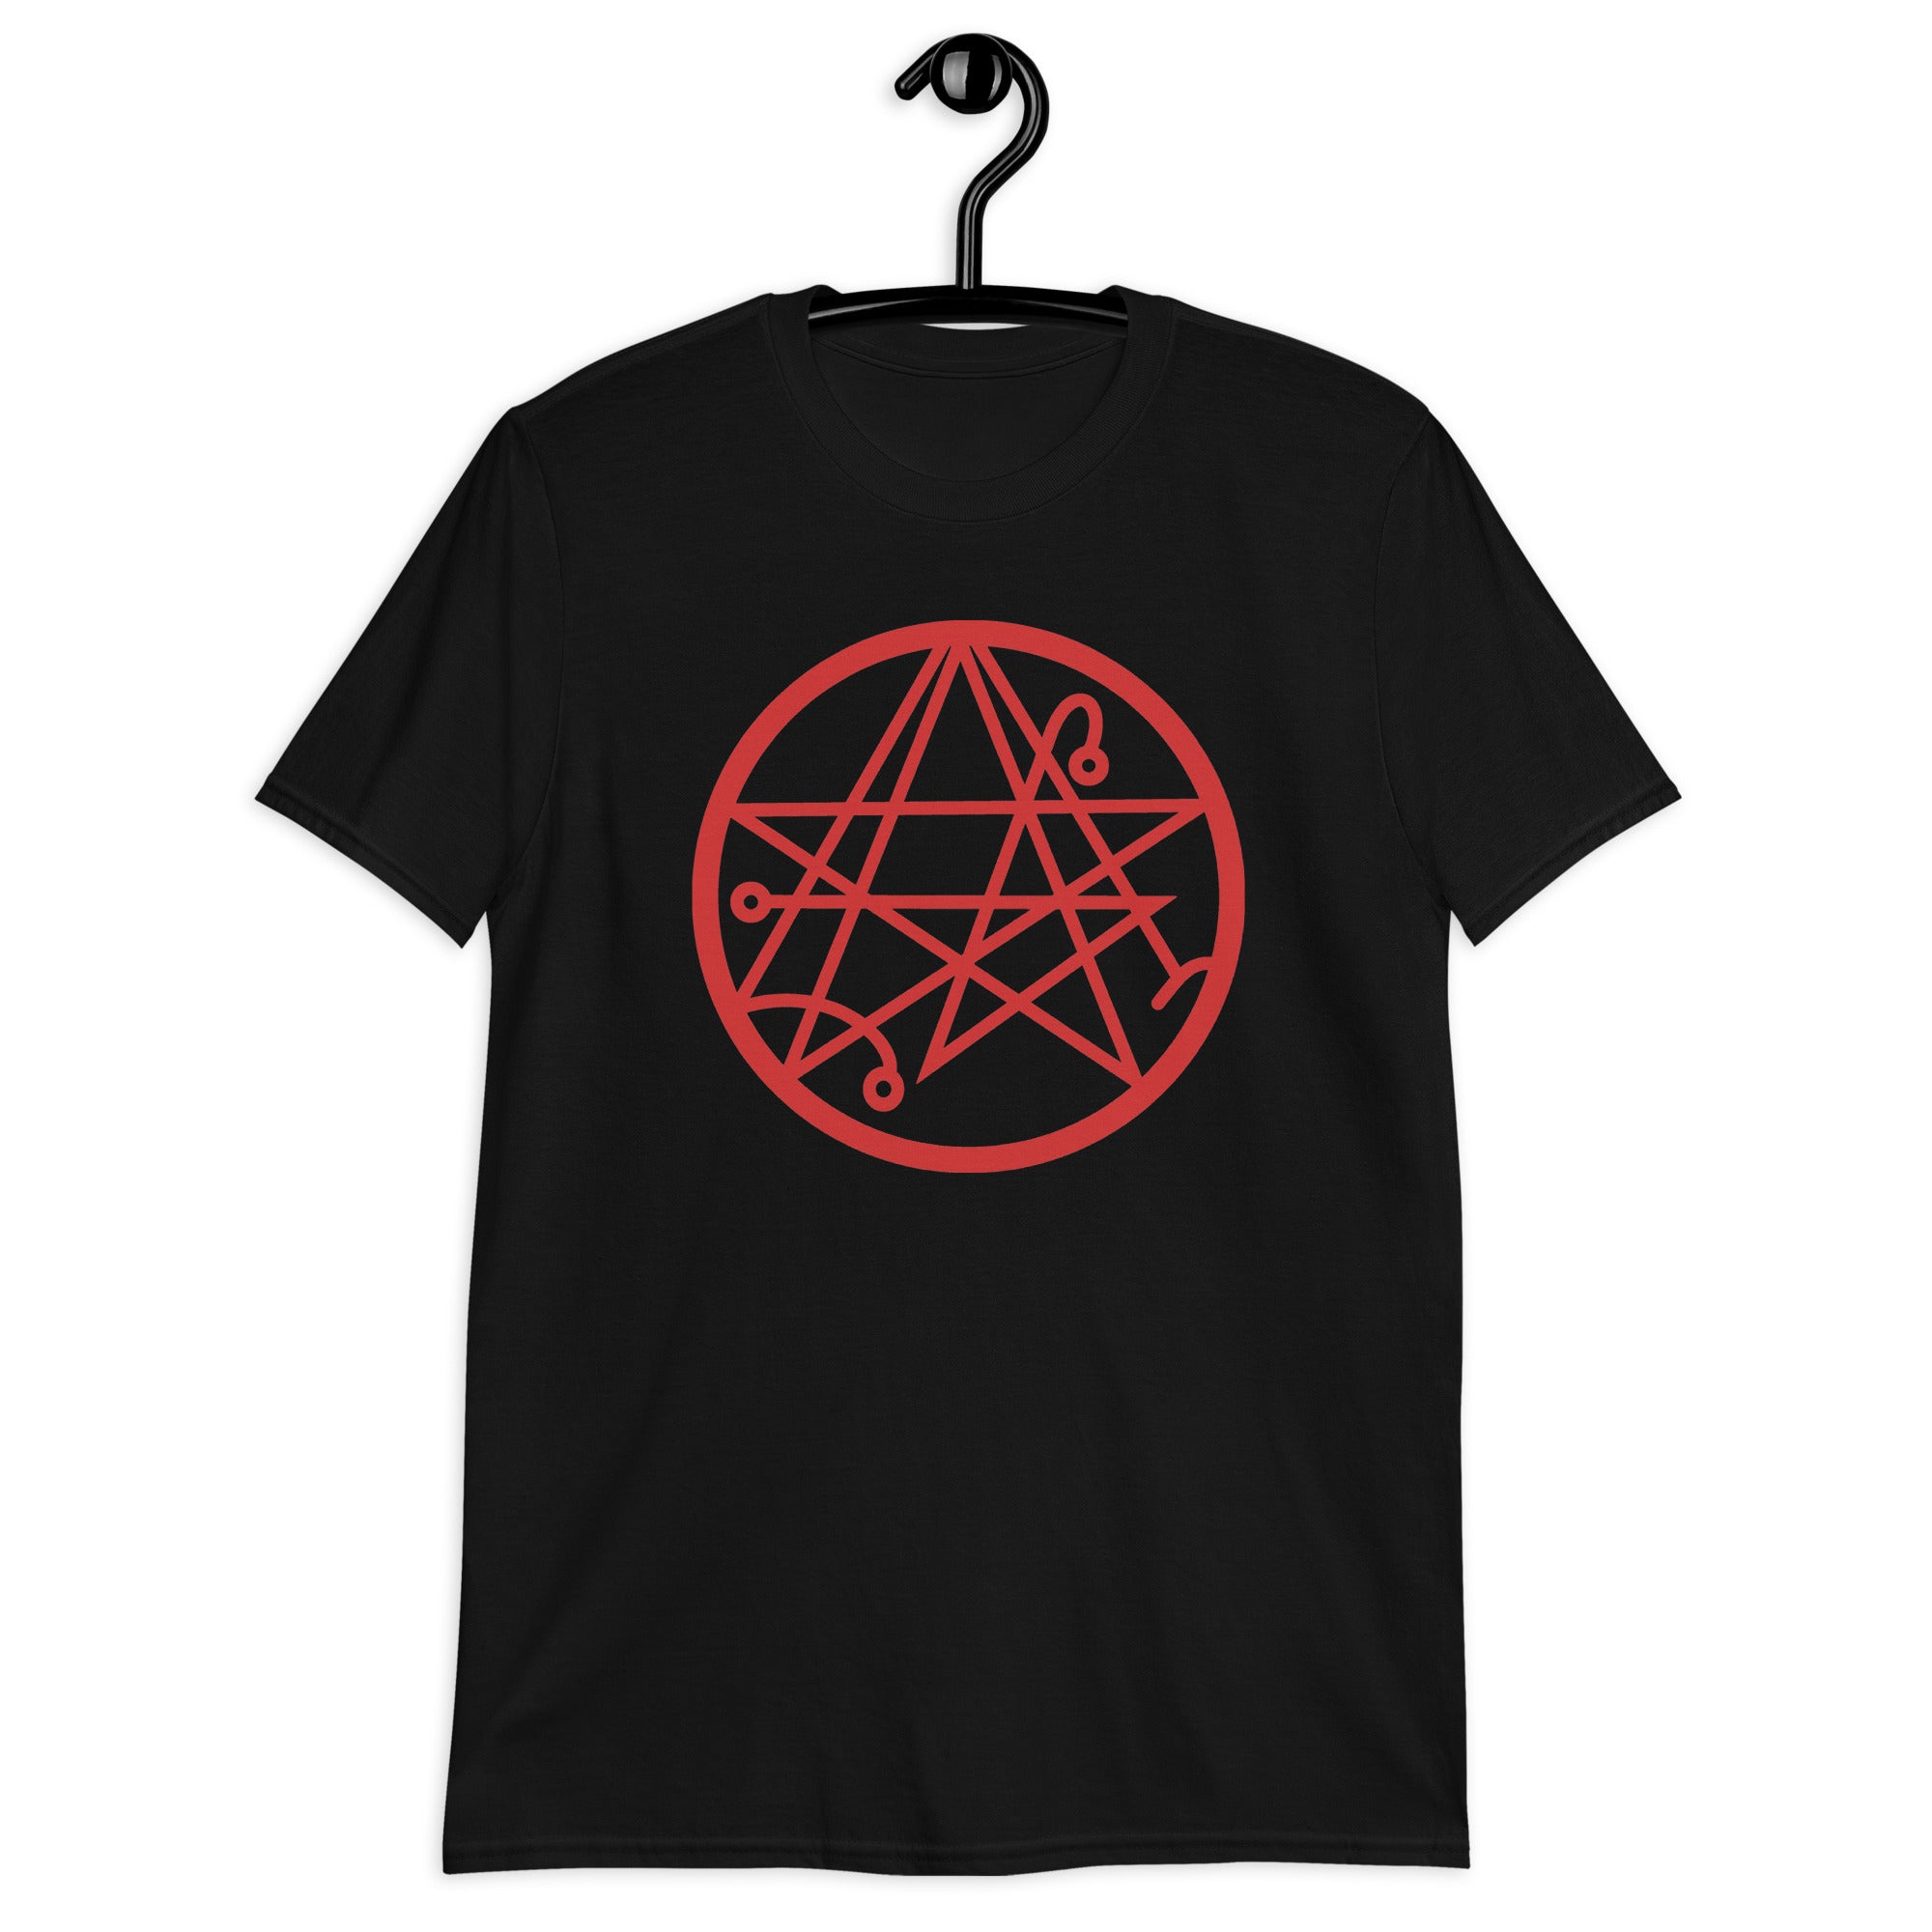 Necronomicon The Book of the Dead Occult Symbol Men's Short Sleeve T-Shirt - Edge of Life Designs